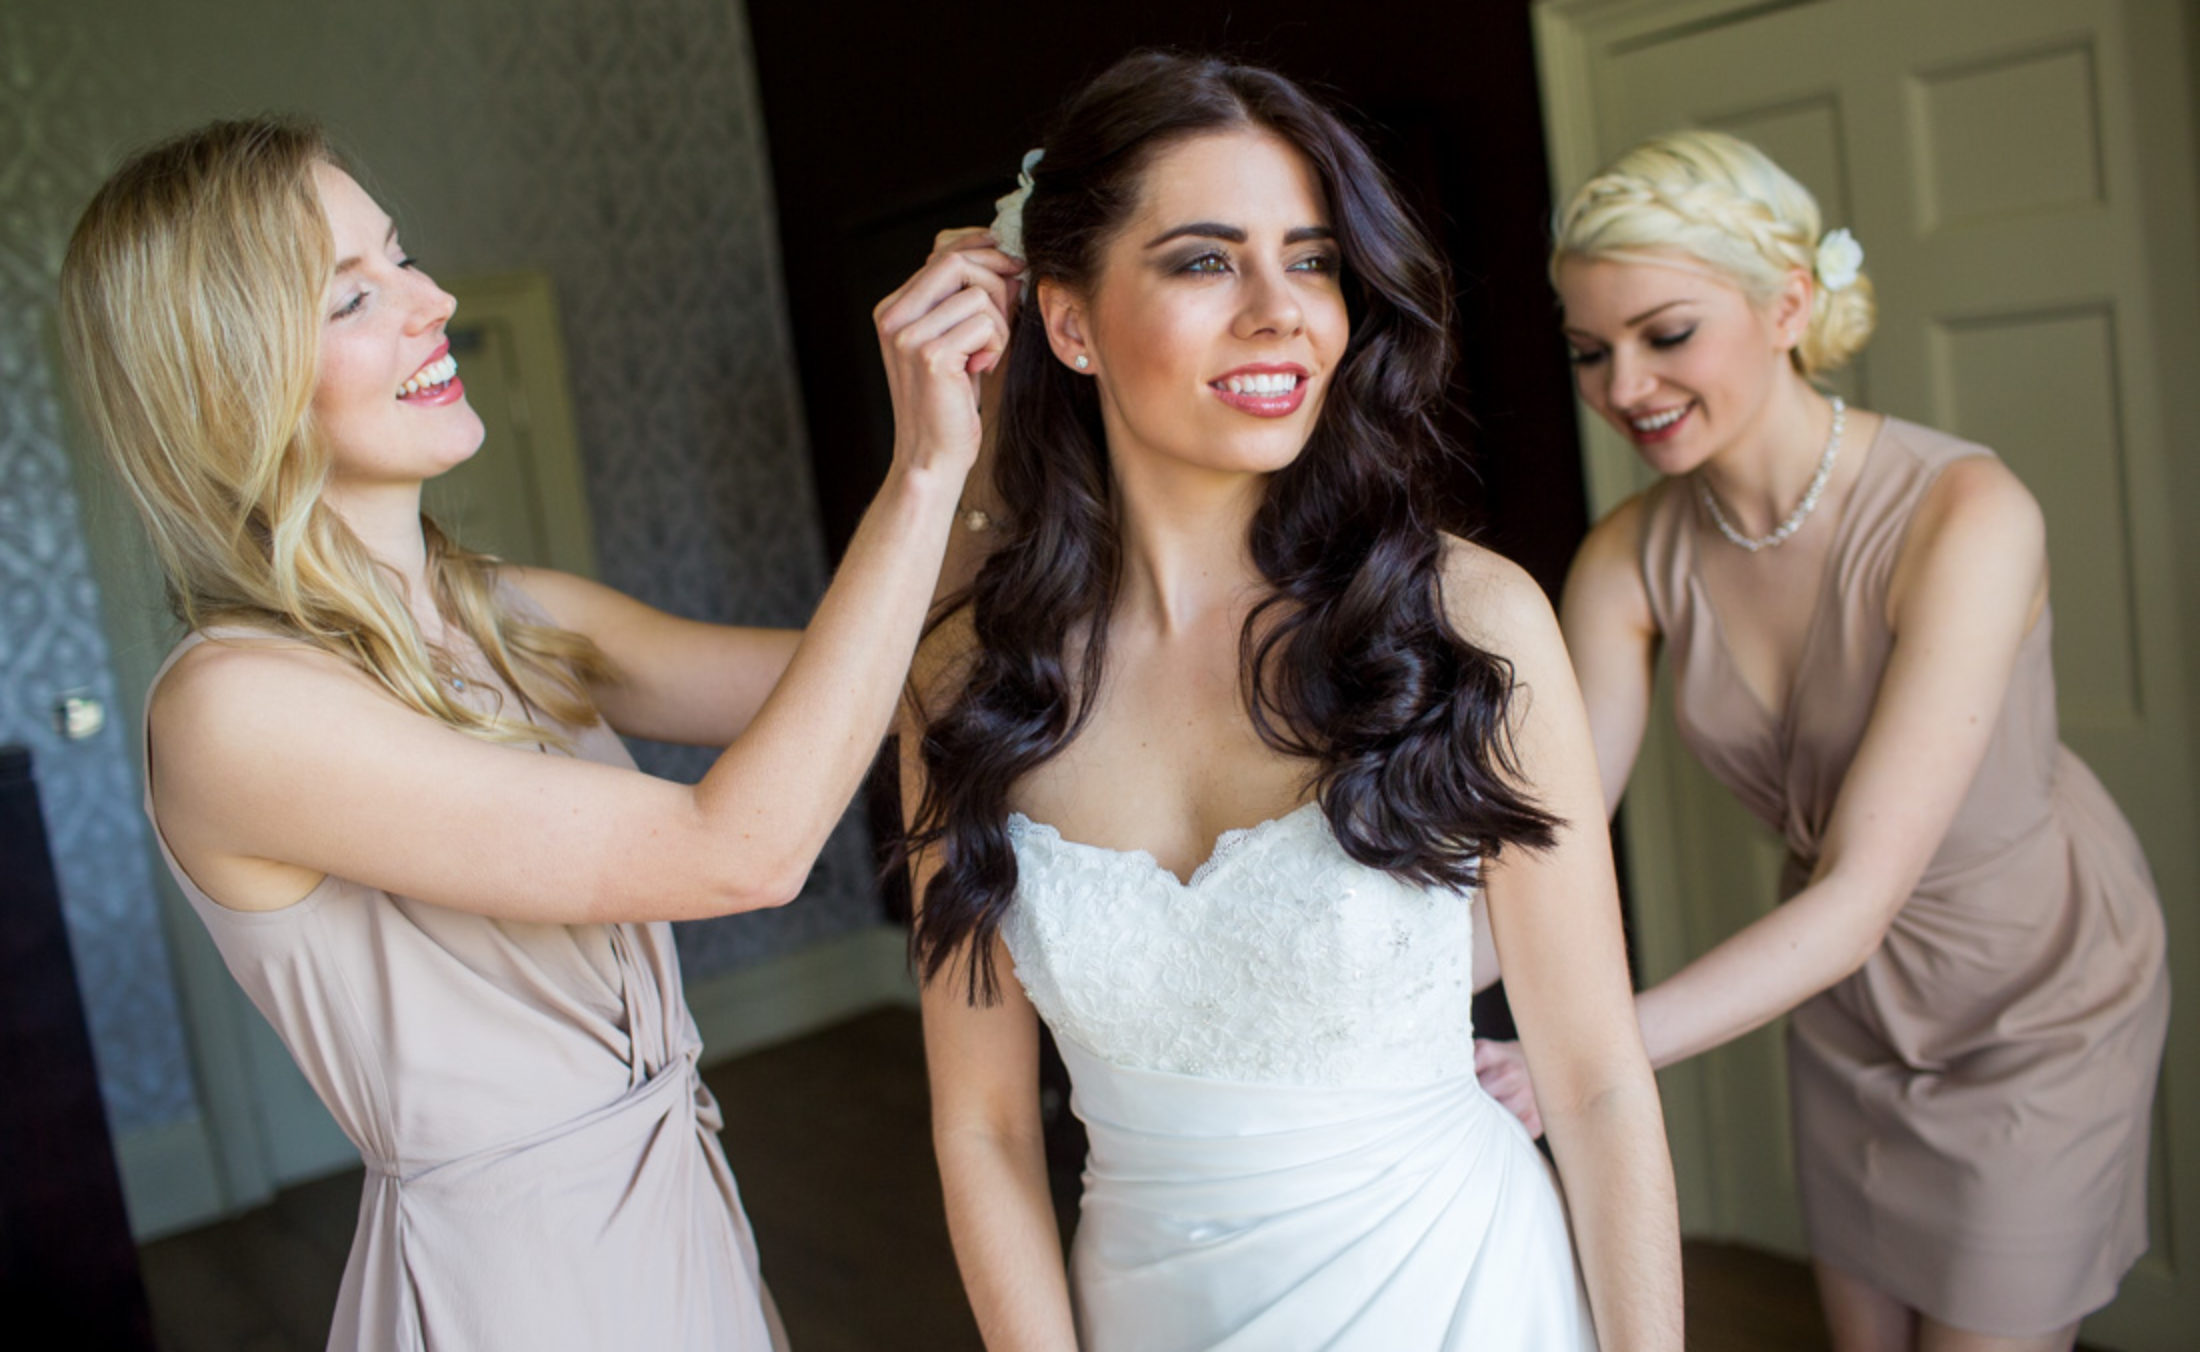 Wedding photography training courses from The Trained Eye